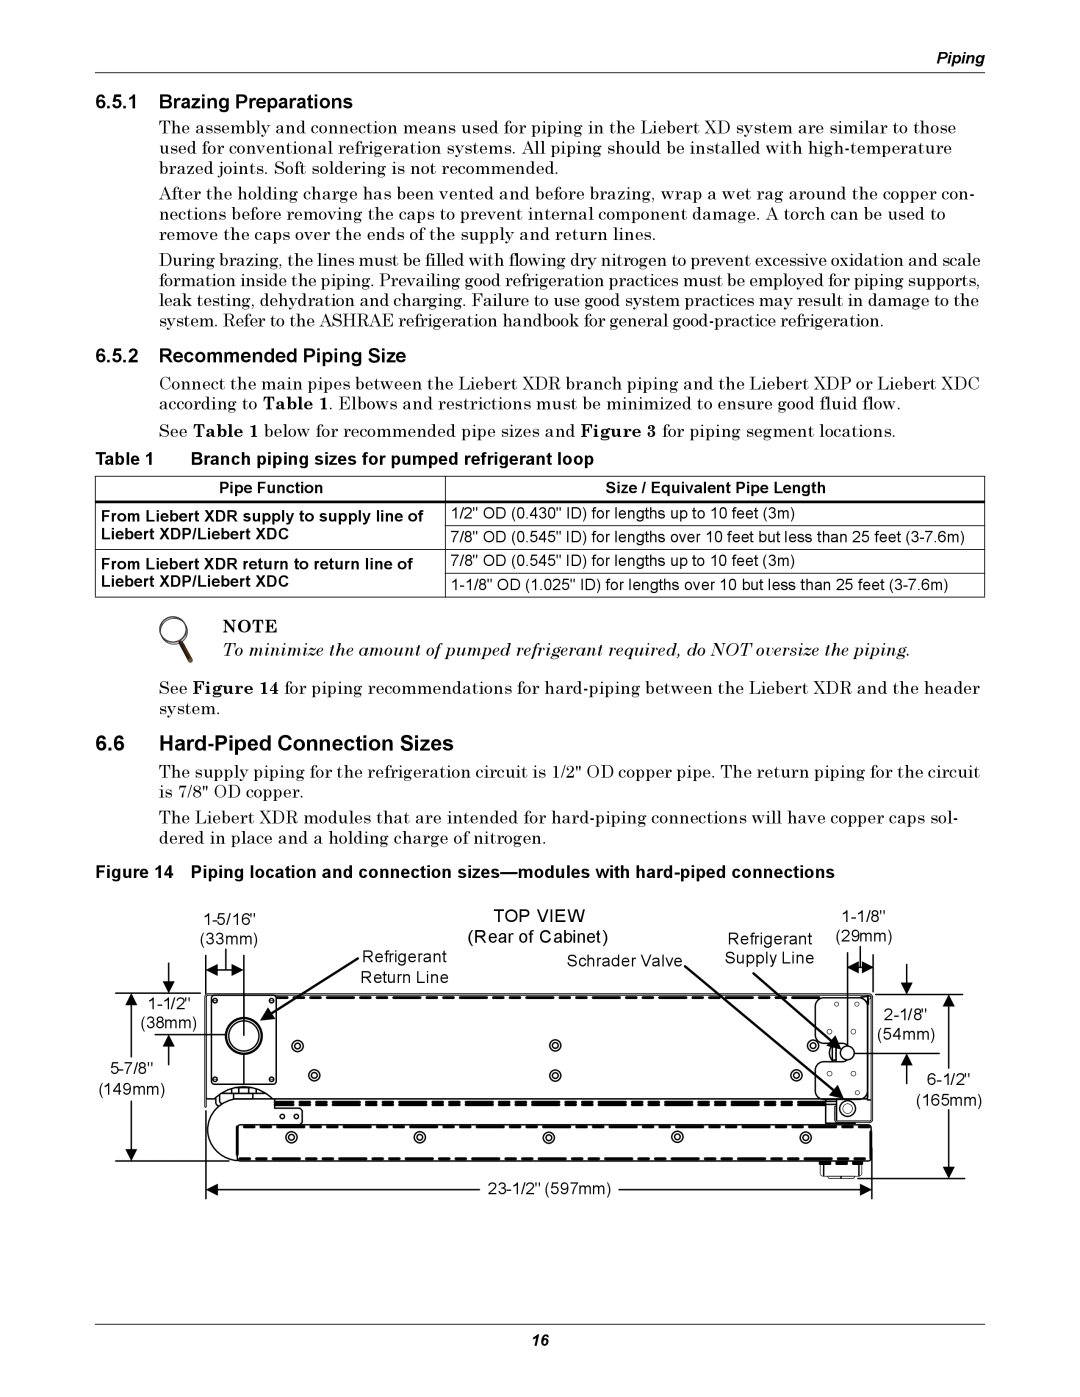 Emerson XDR user manual 6.6Hard-PipedConnection Sizes, 6.5.1Brazing Preparations, 6.5.2Recommended Piping Size, Top View 